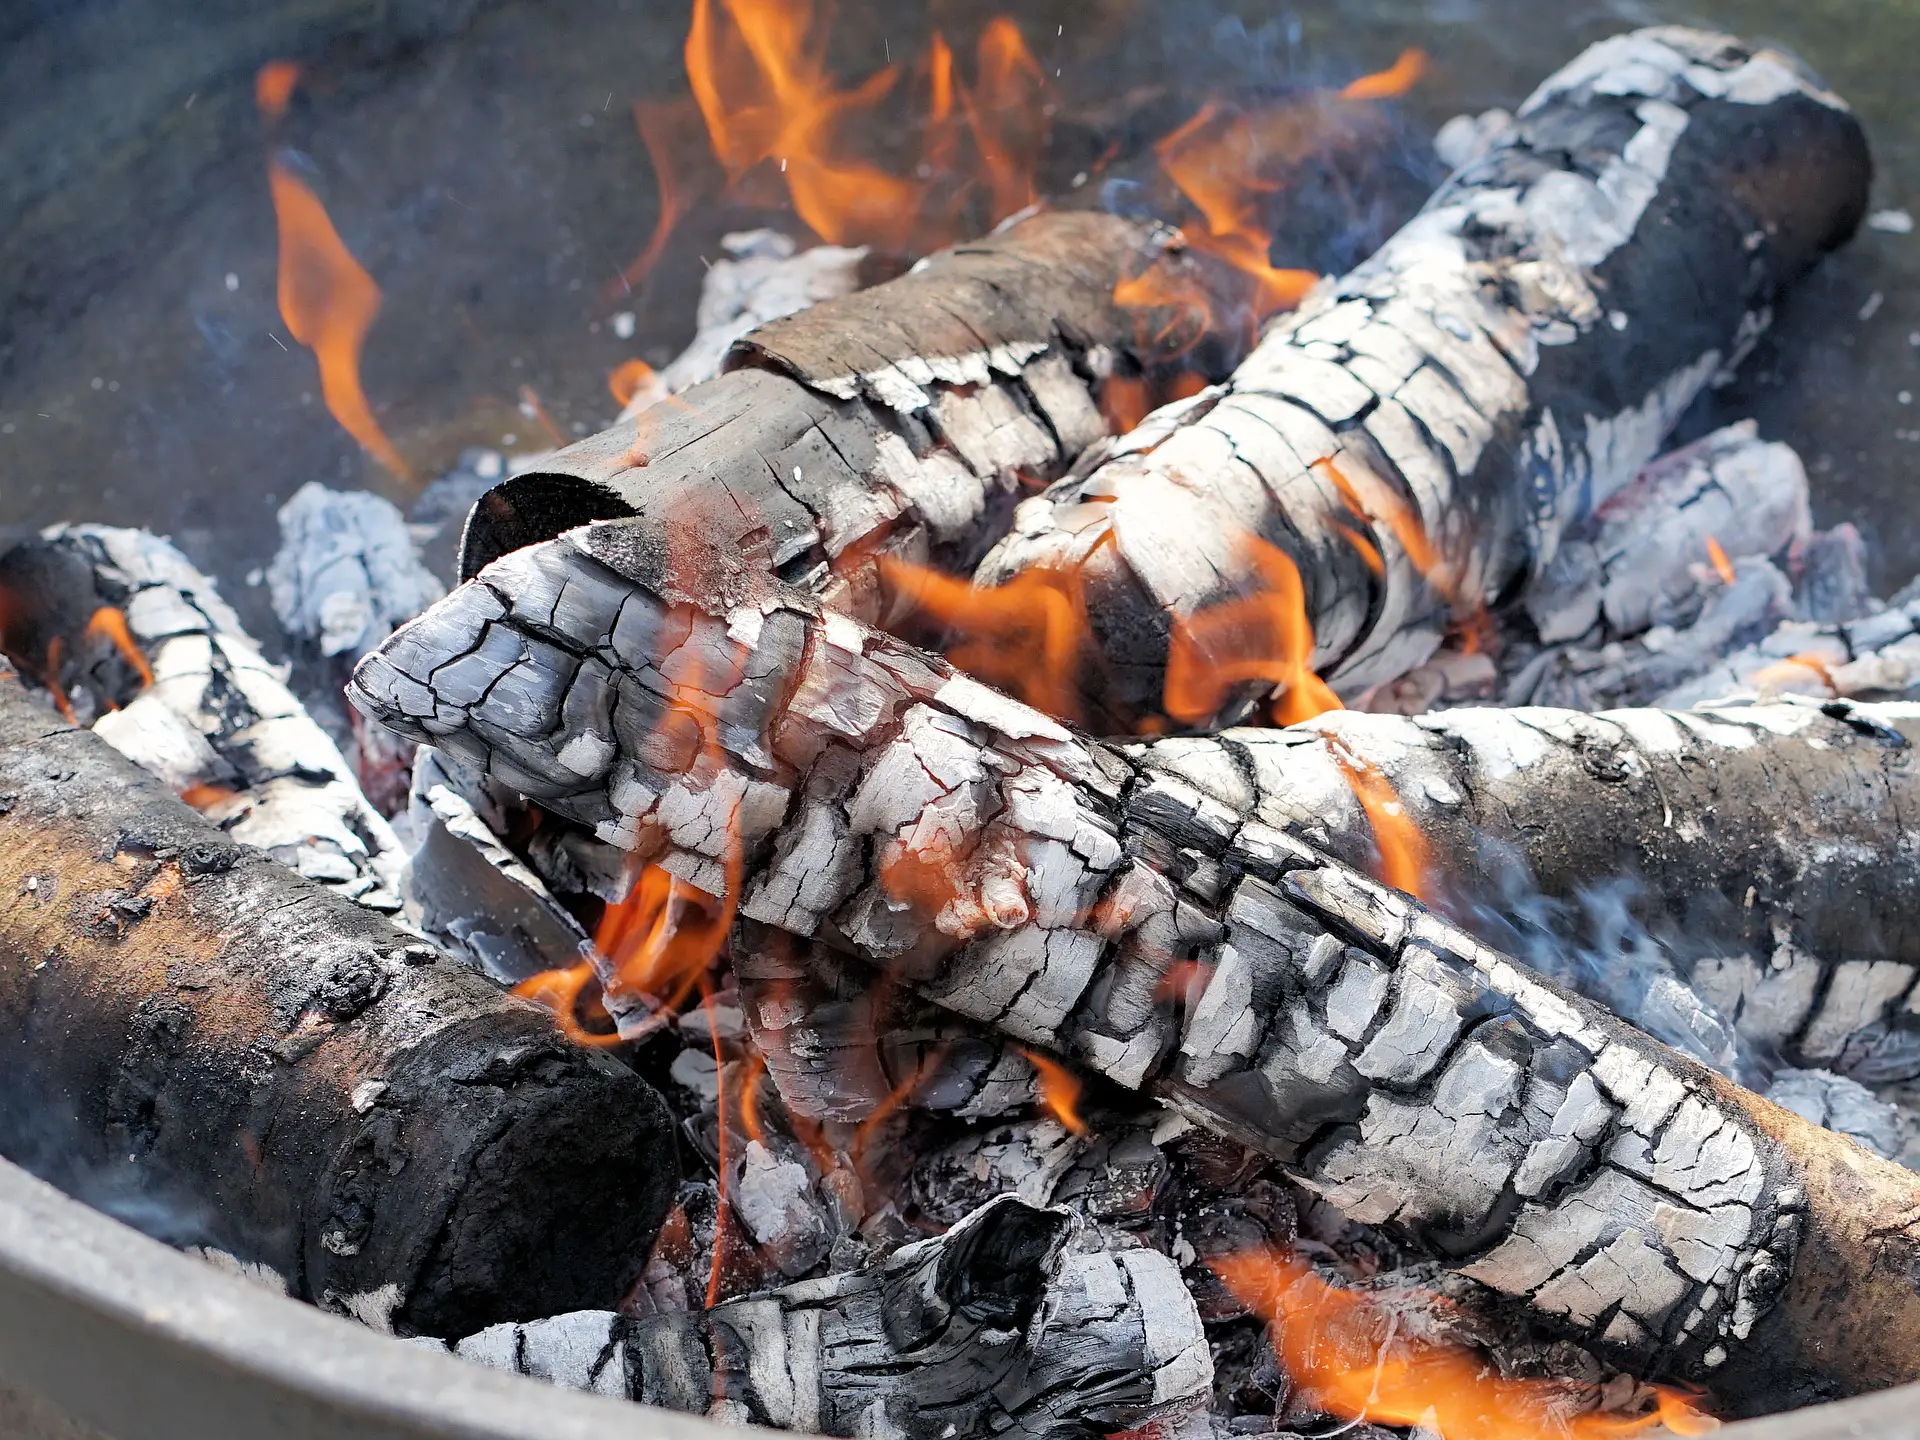 How To Start A Wood Burning Fire Pit, Best Kindling For Fire Pit